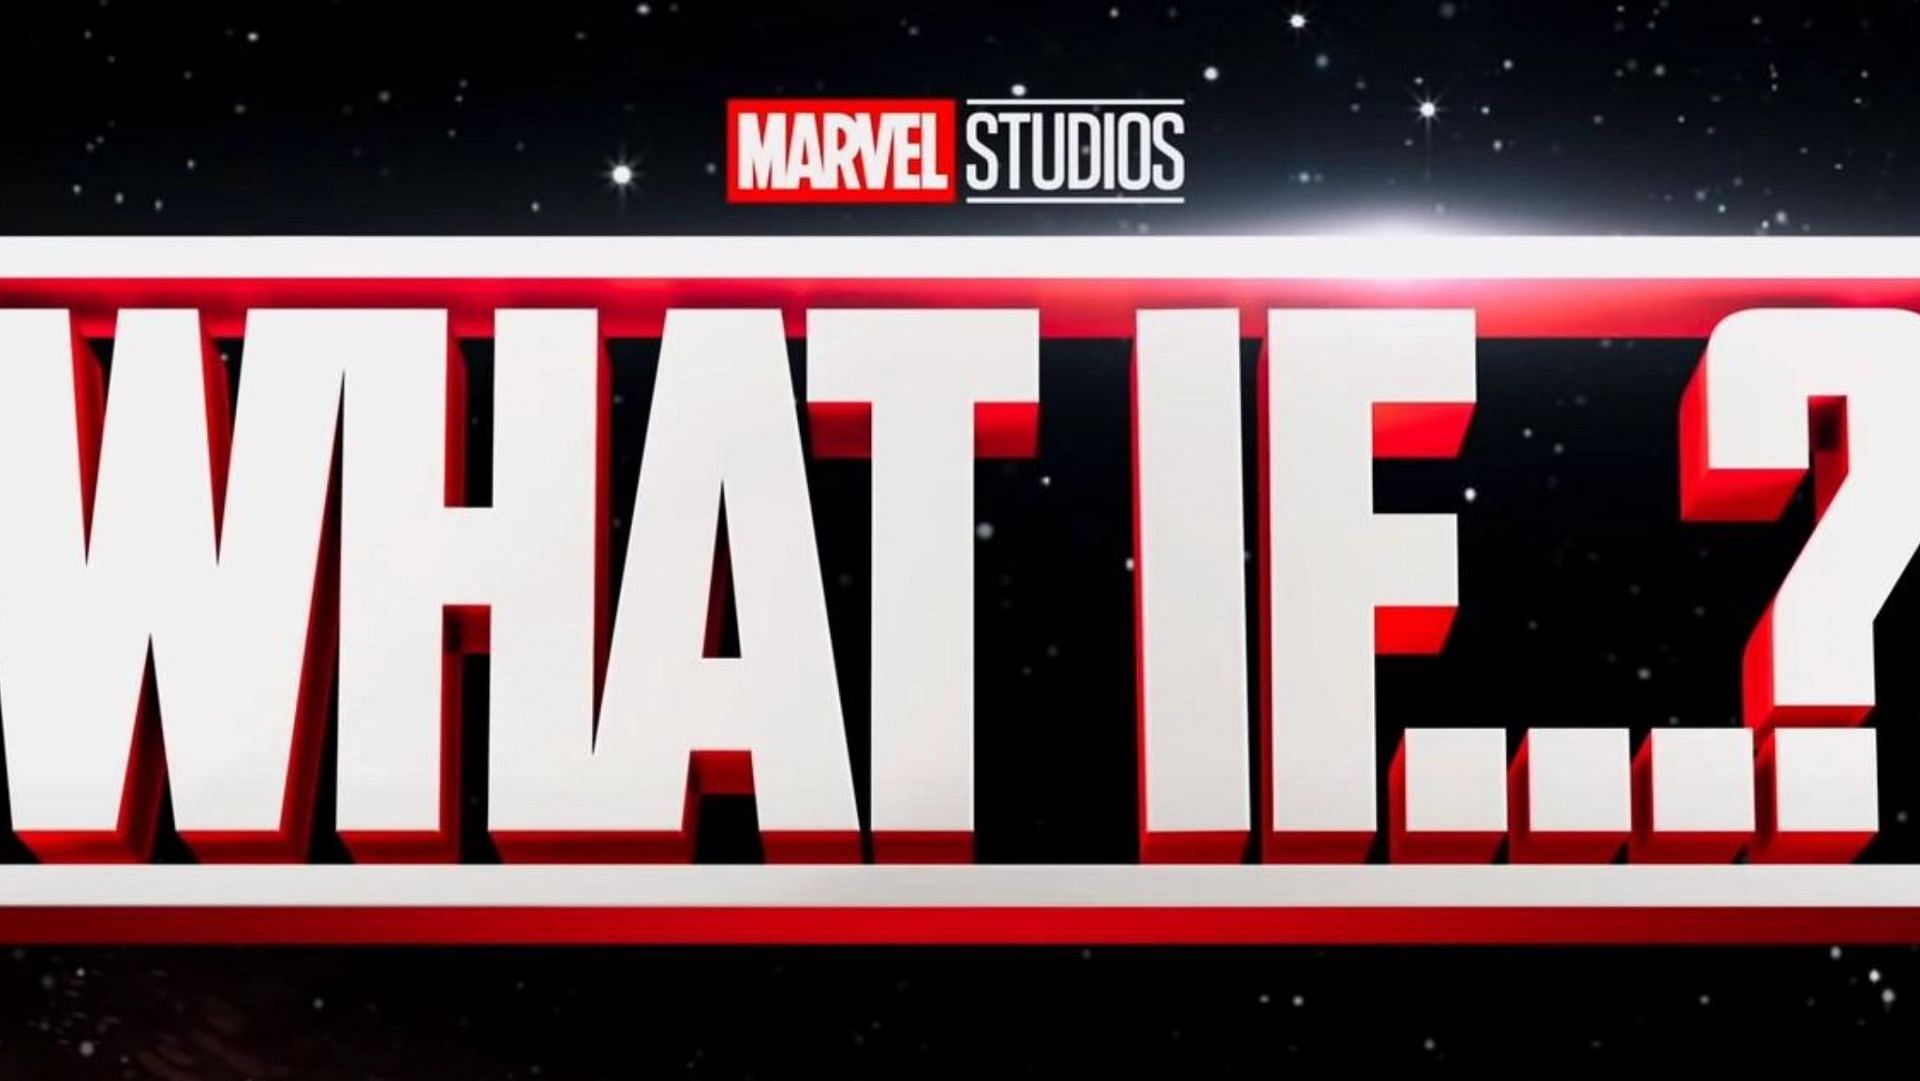 The Mohawk language and history inspire an episode in What If...? Season 2 (Image via Marvel Studios)